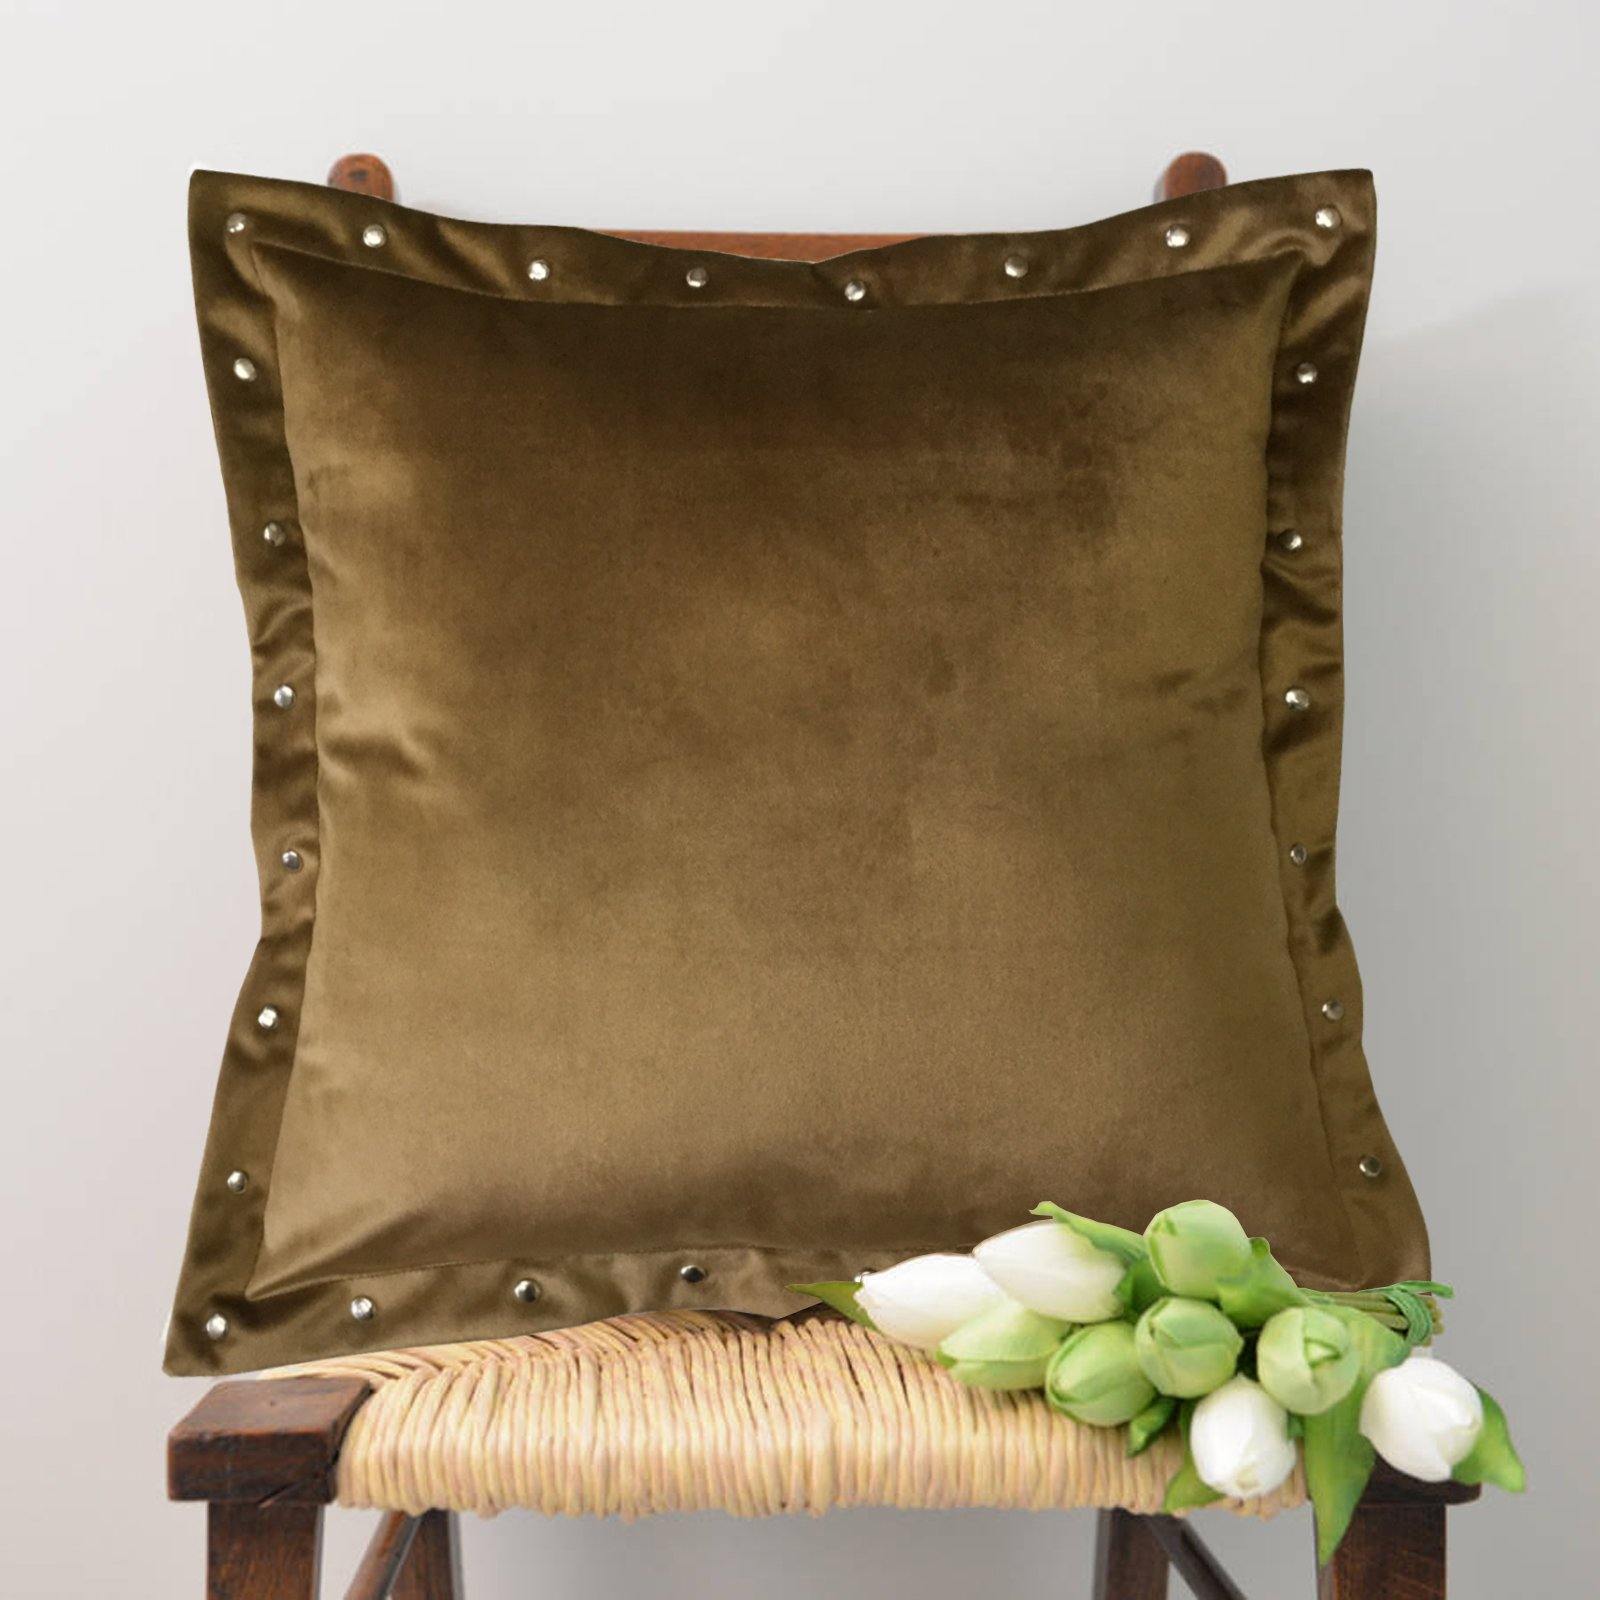 Lushomes Smooth Tan Velvet Cushion covers with some metallic Oomph (Single Pc, 16‰۝ x 16‰۝) - Lushomes